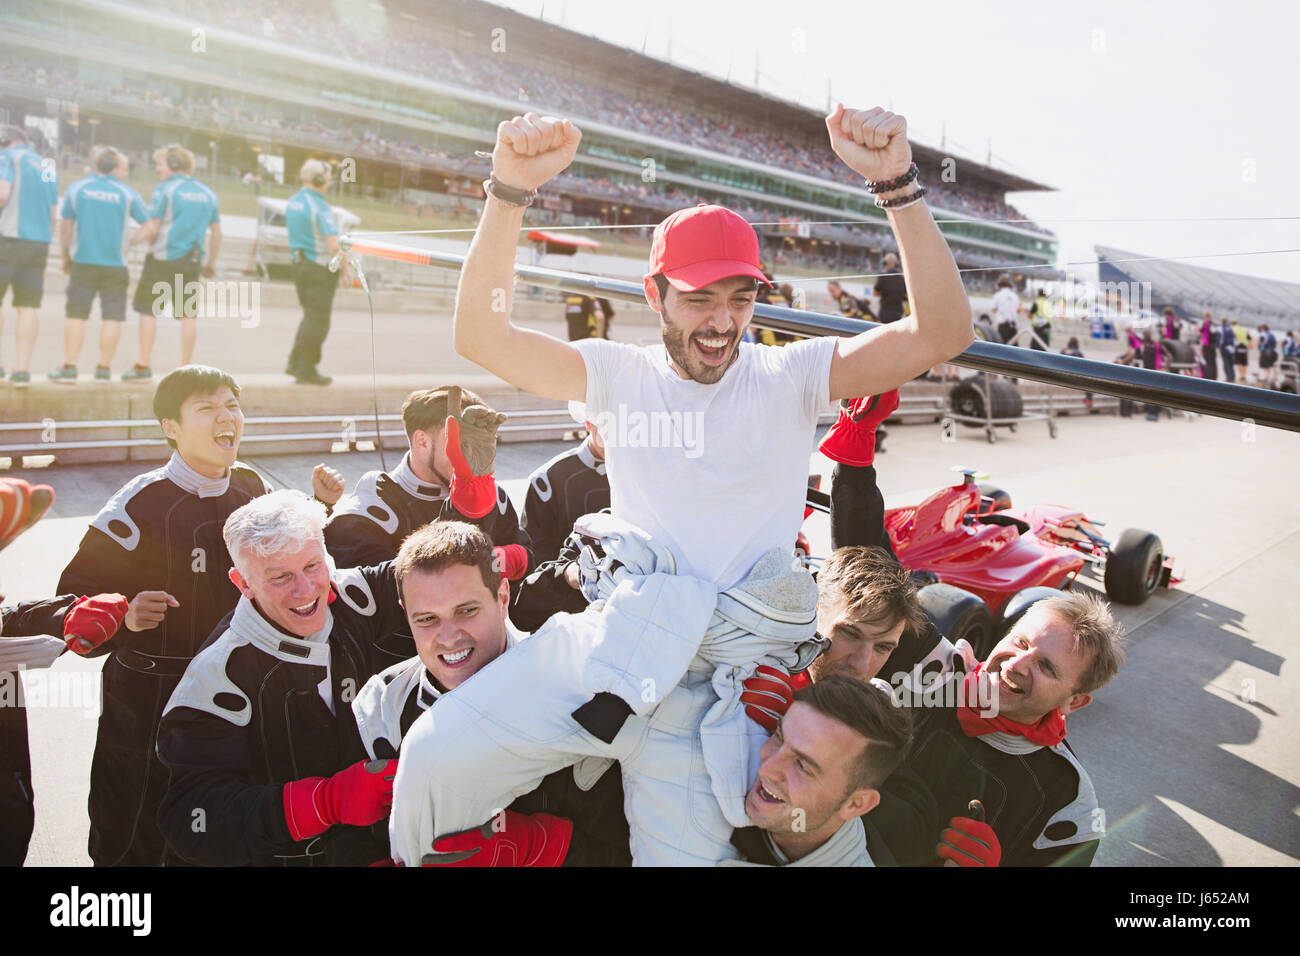 Formula one racing team carrying driver on shoulders, celebrating victory on sports track Stock Photo